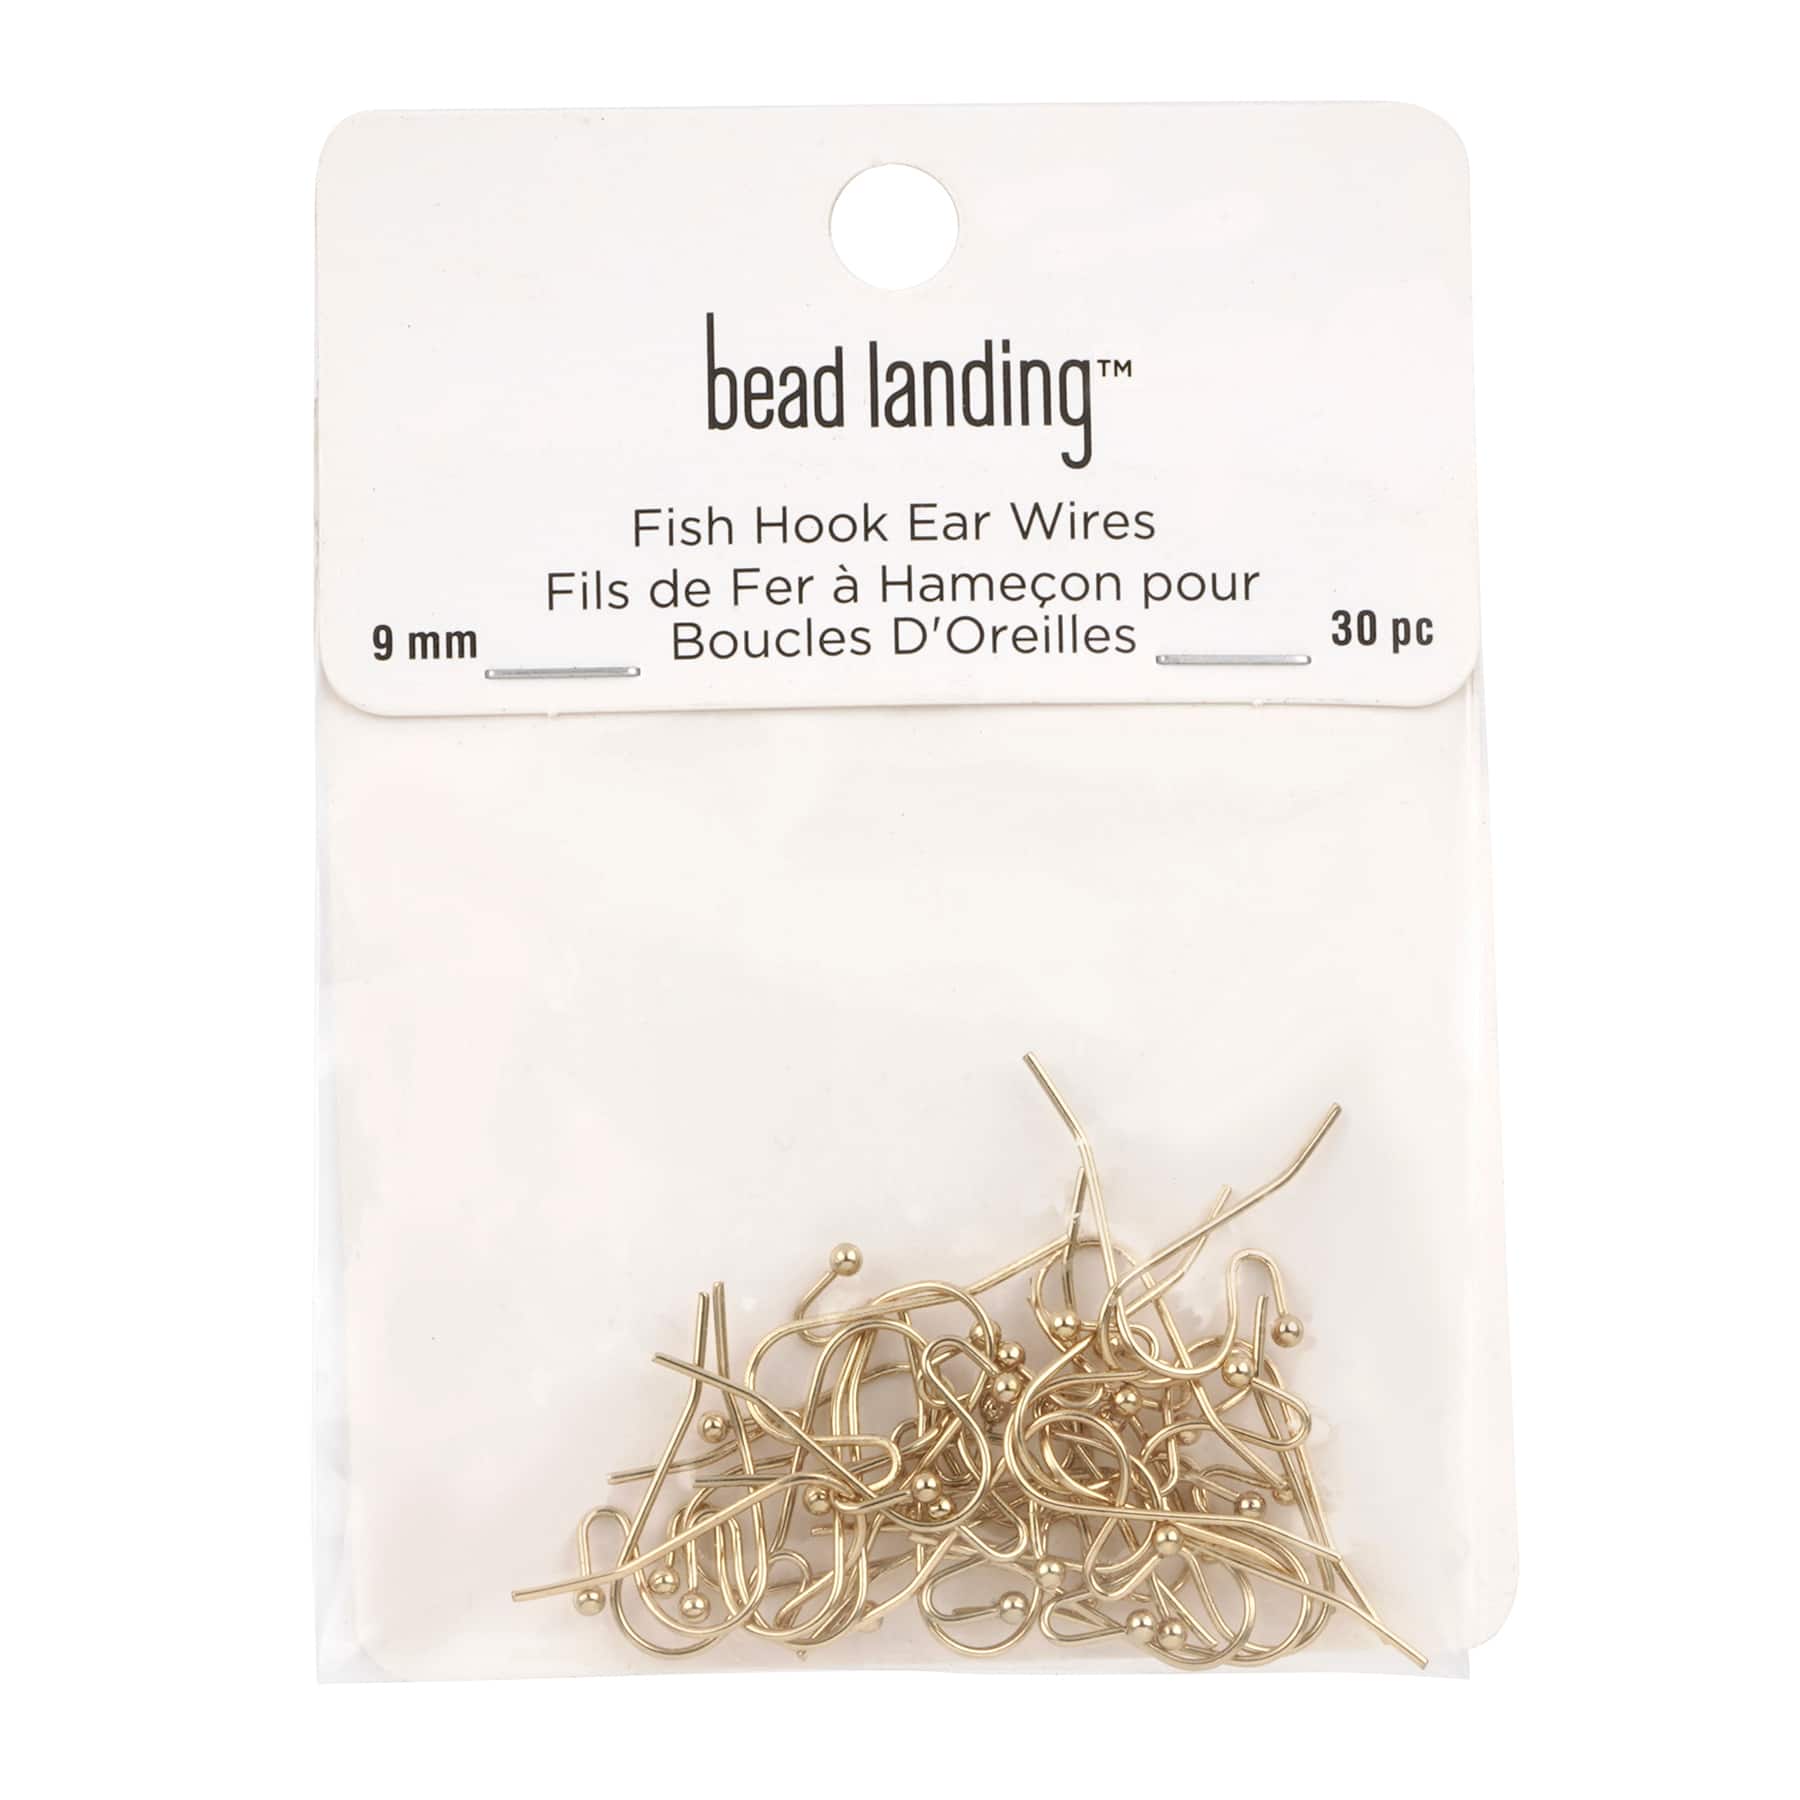 12 Packs: 30 ct. (360 total) 9mm Fish Hook Ear Wires by Bead Landing&#x2122;